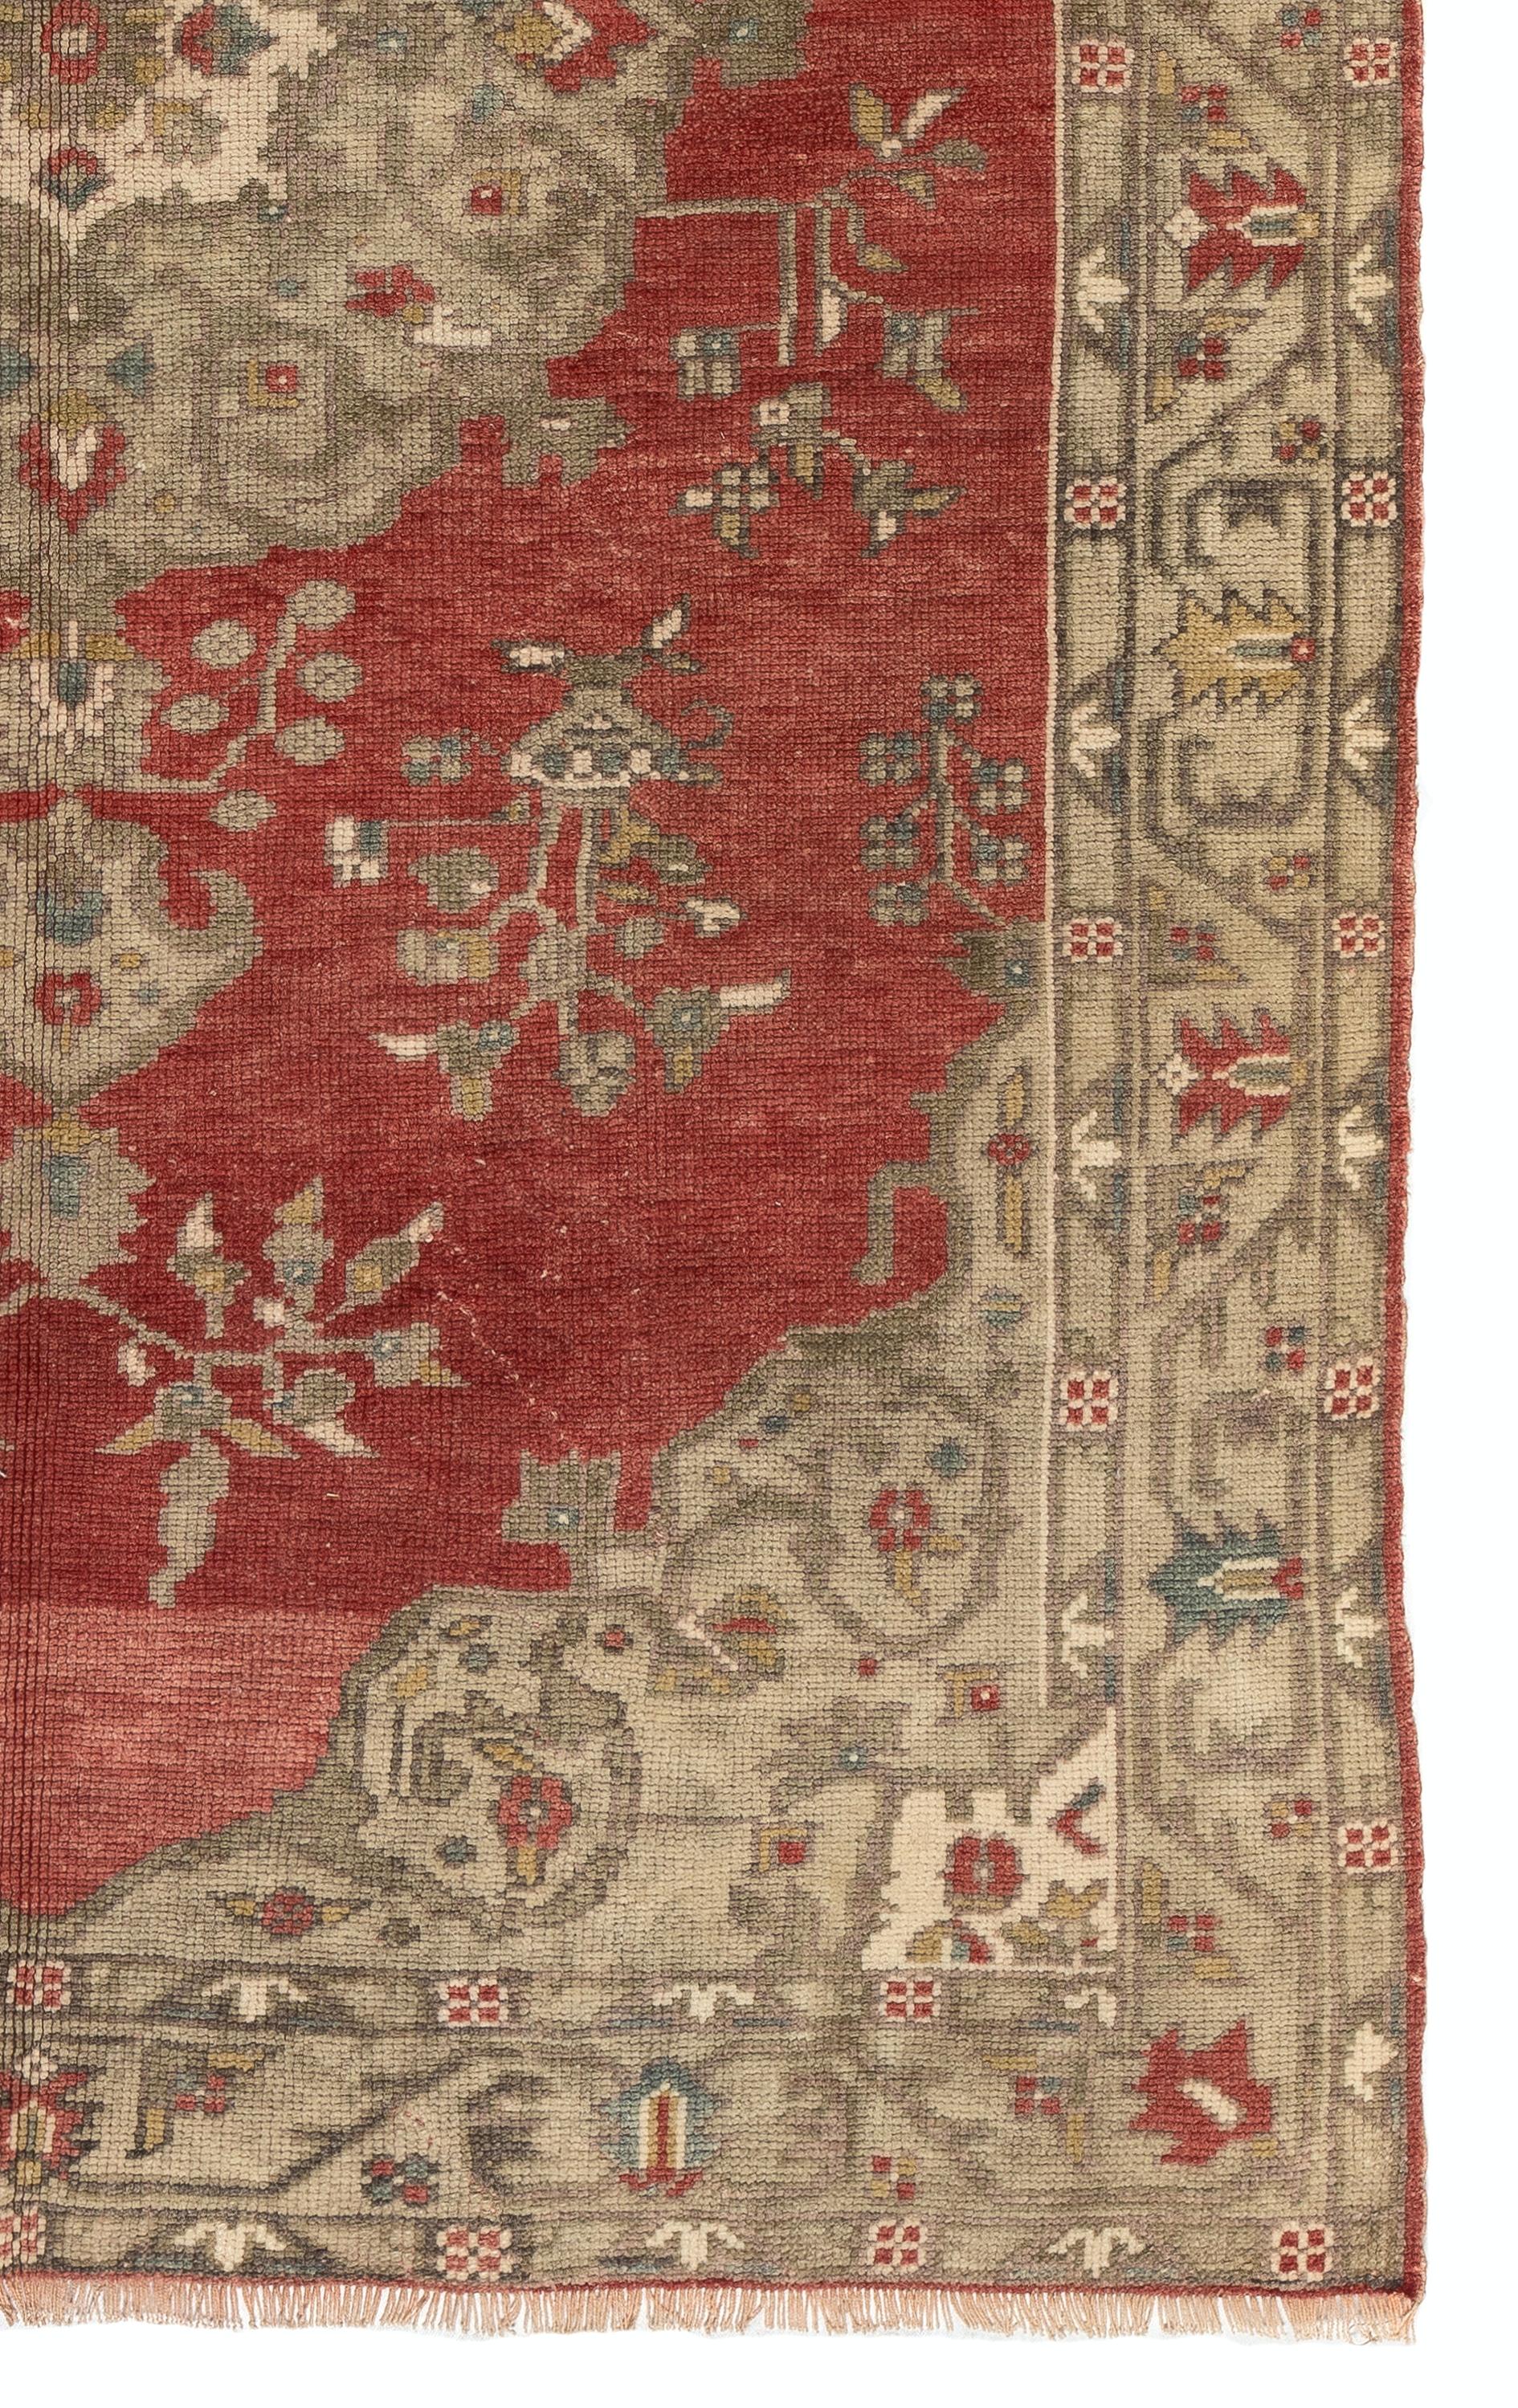 Early 20th Century 5.5x8.6 Ft Antique Turkish Bergama Rug, circa 1920, One-of-a-kind Carpet For Sale